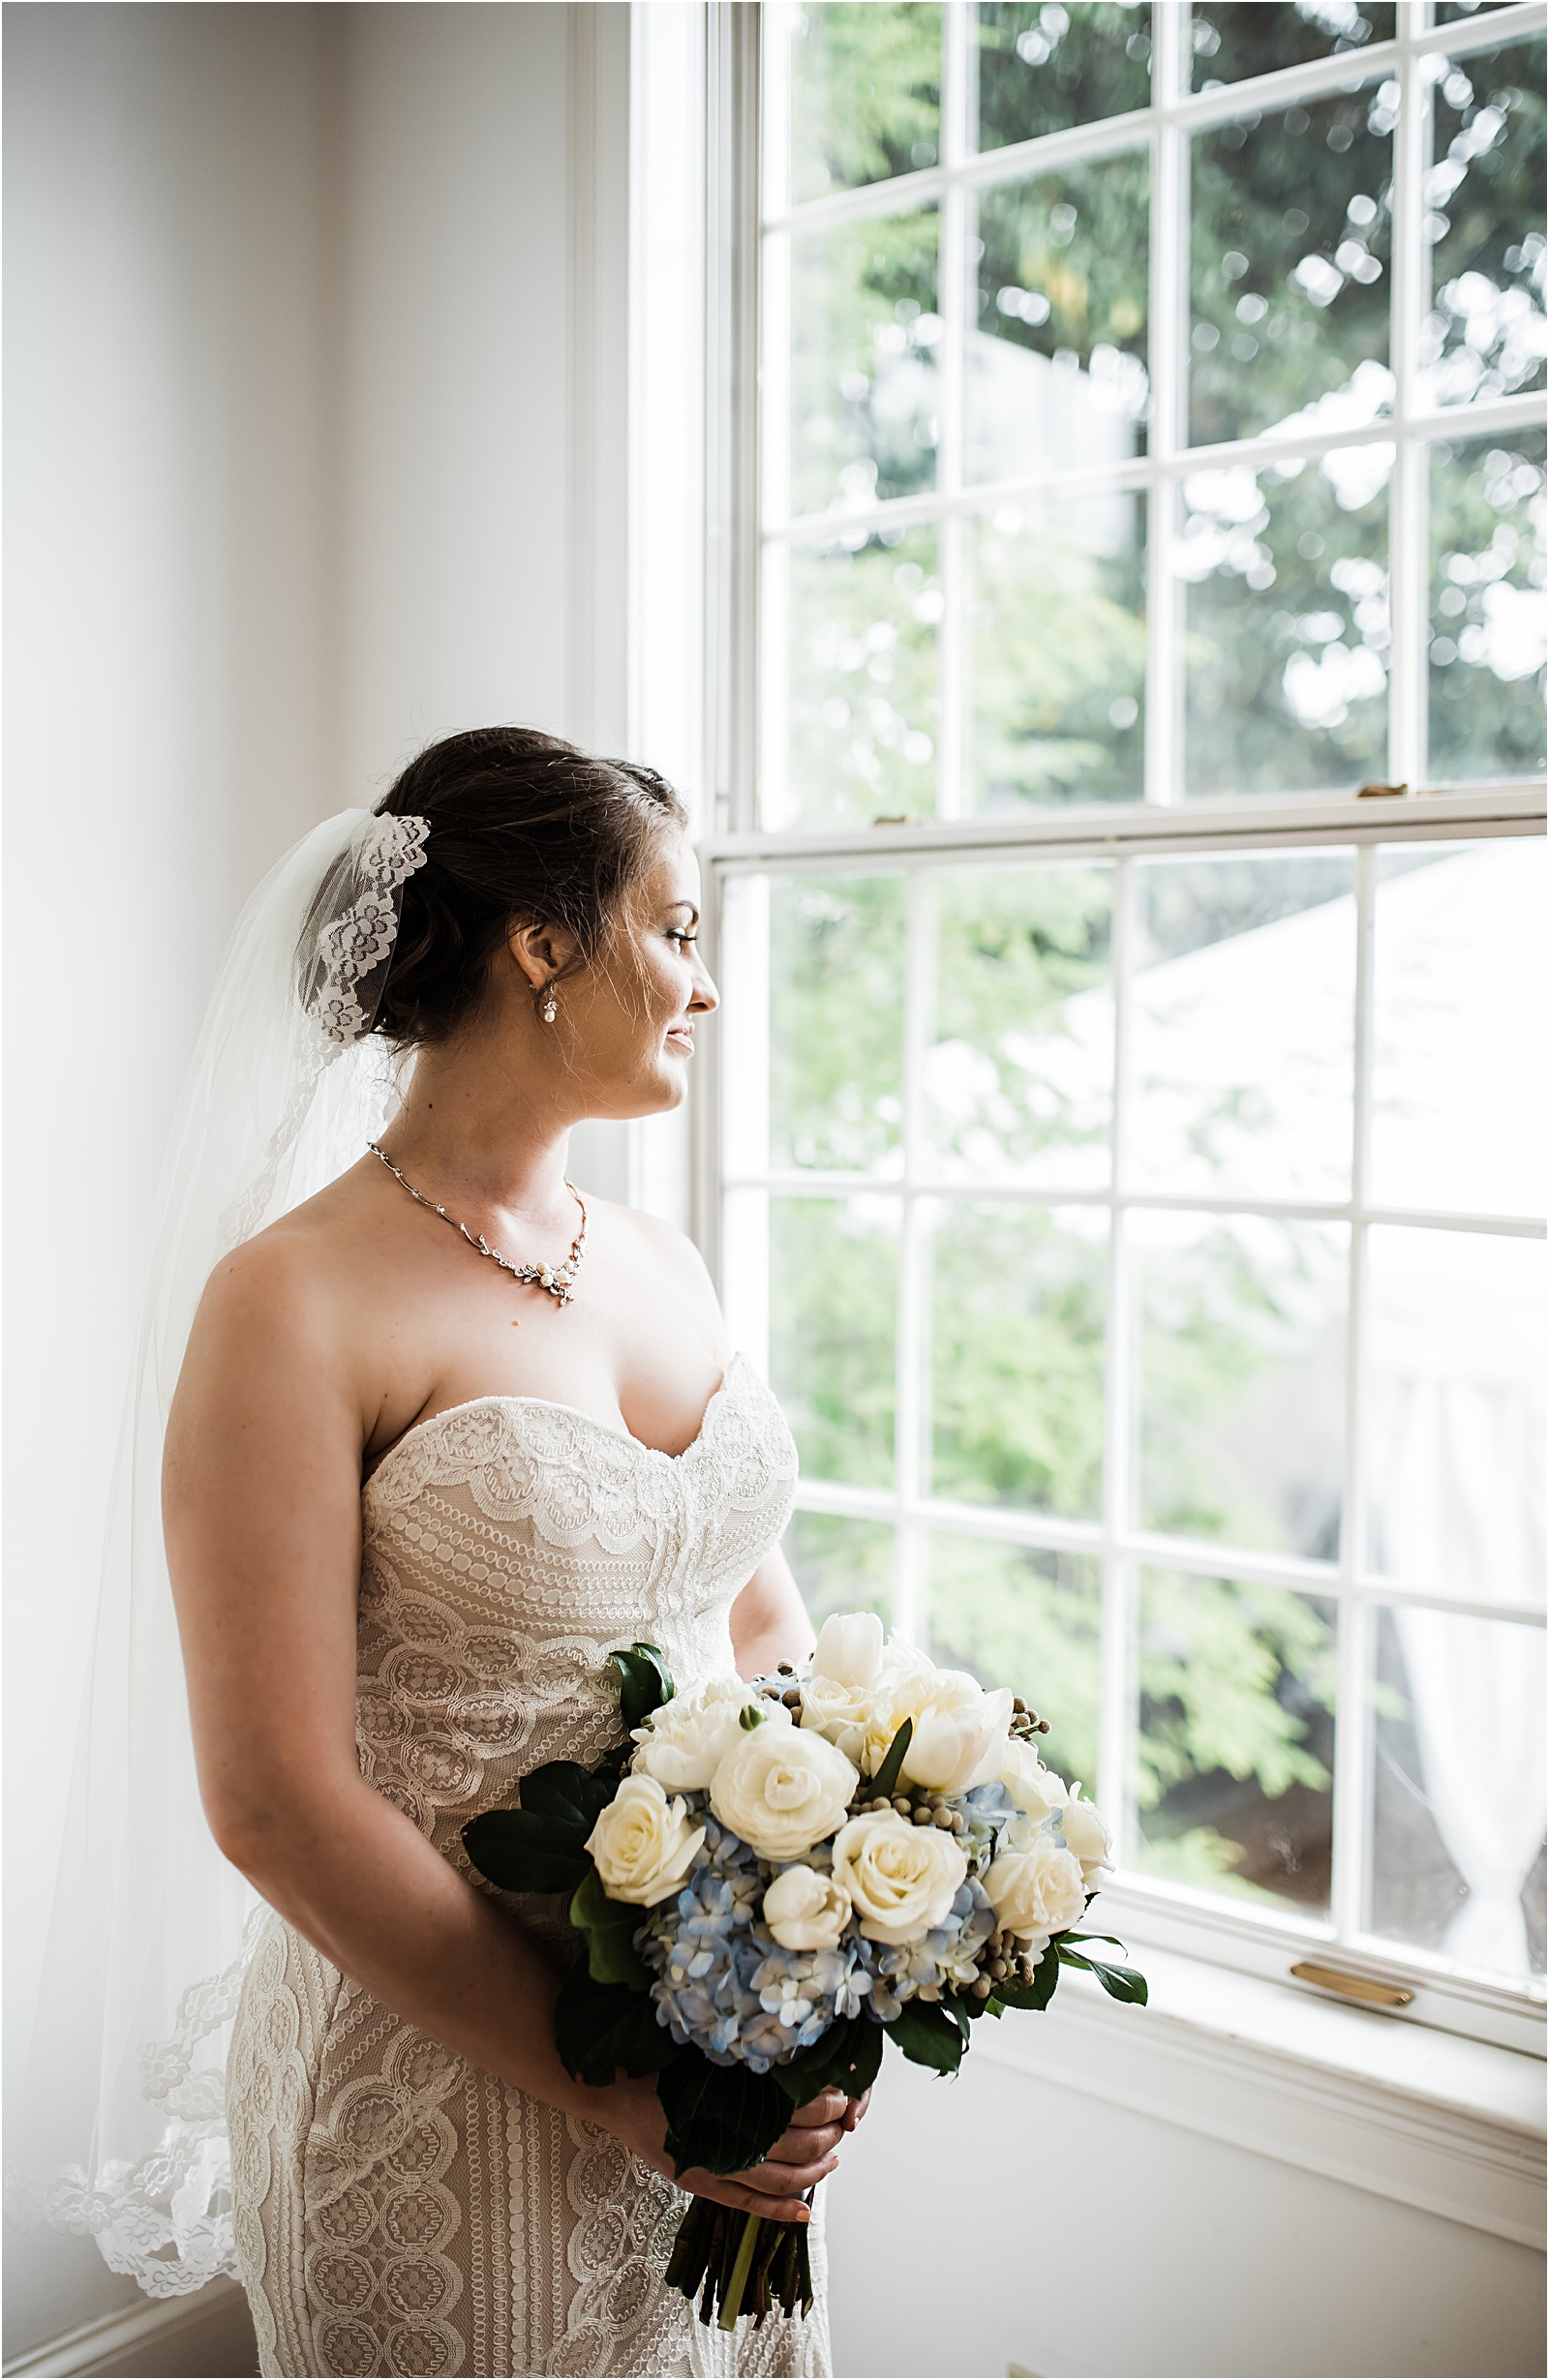 Always in Bloom Wedding Florist,Amber Lowe Photo,Bradford Catering,Crescent Bend,Impact Entertainment,Knoxville Wedding Photographer,Sweet Beginnings by Elaine,